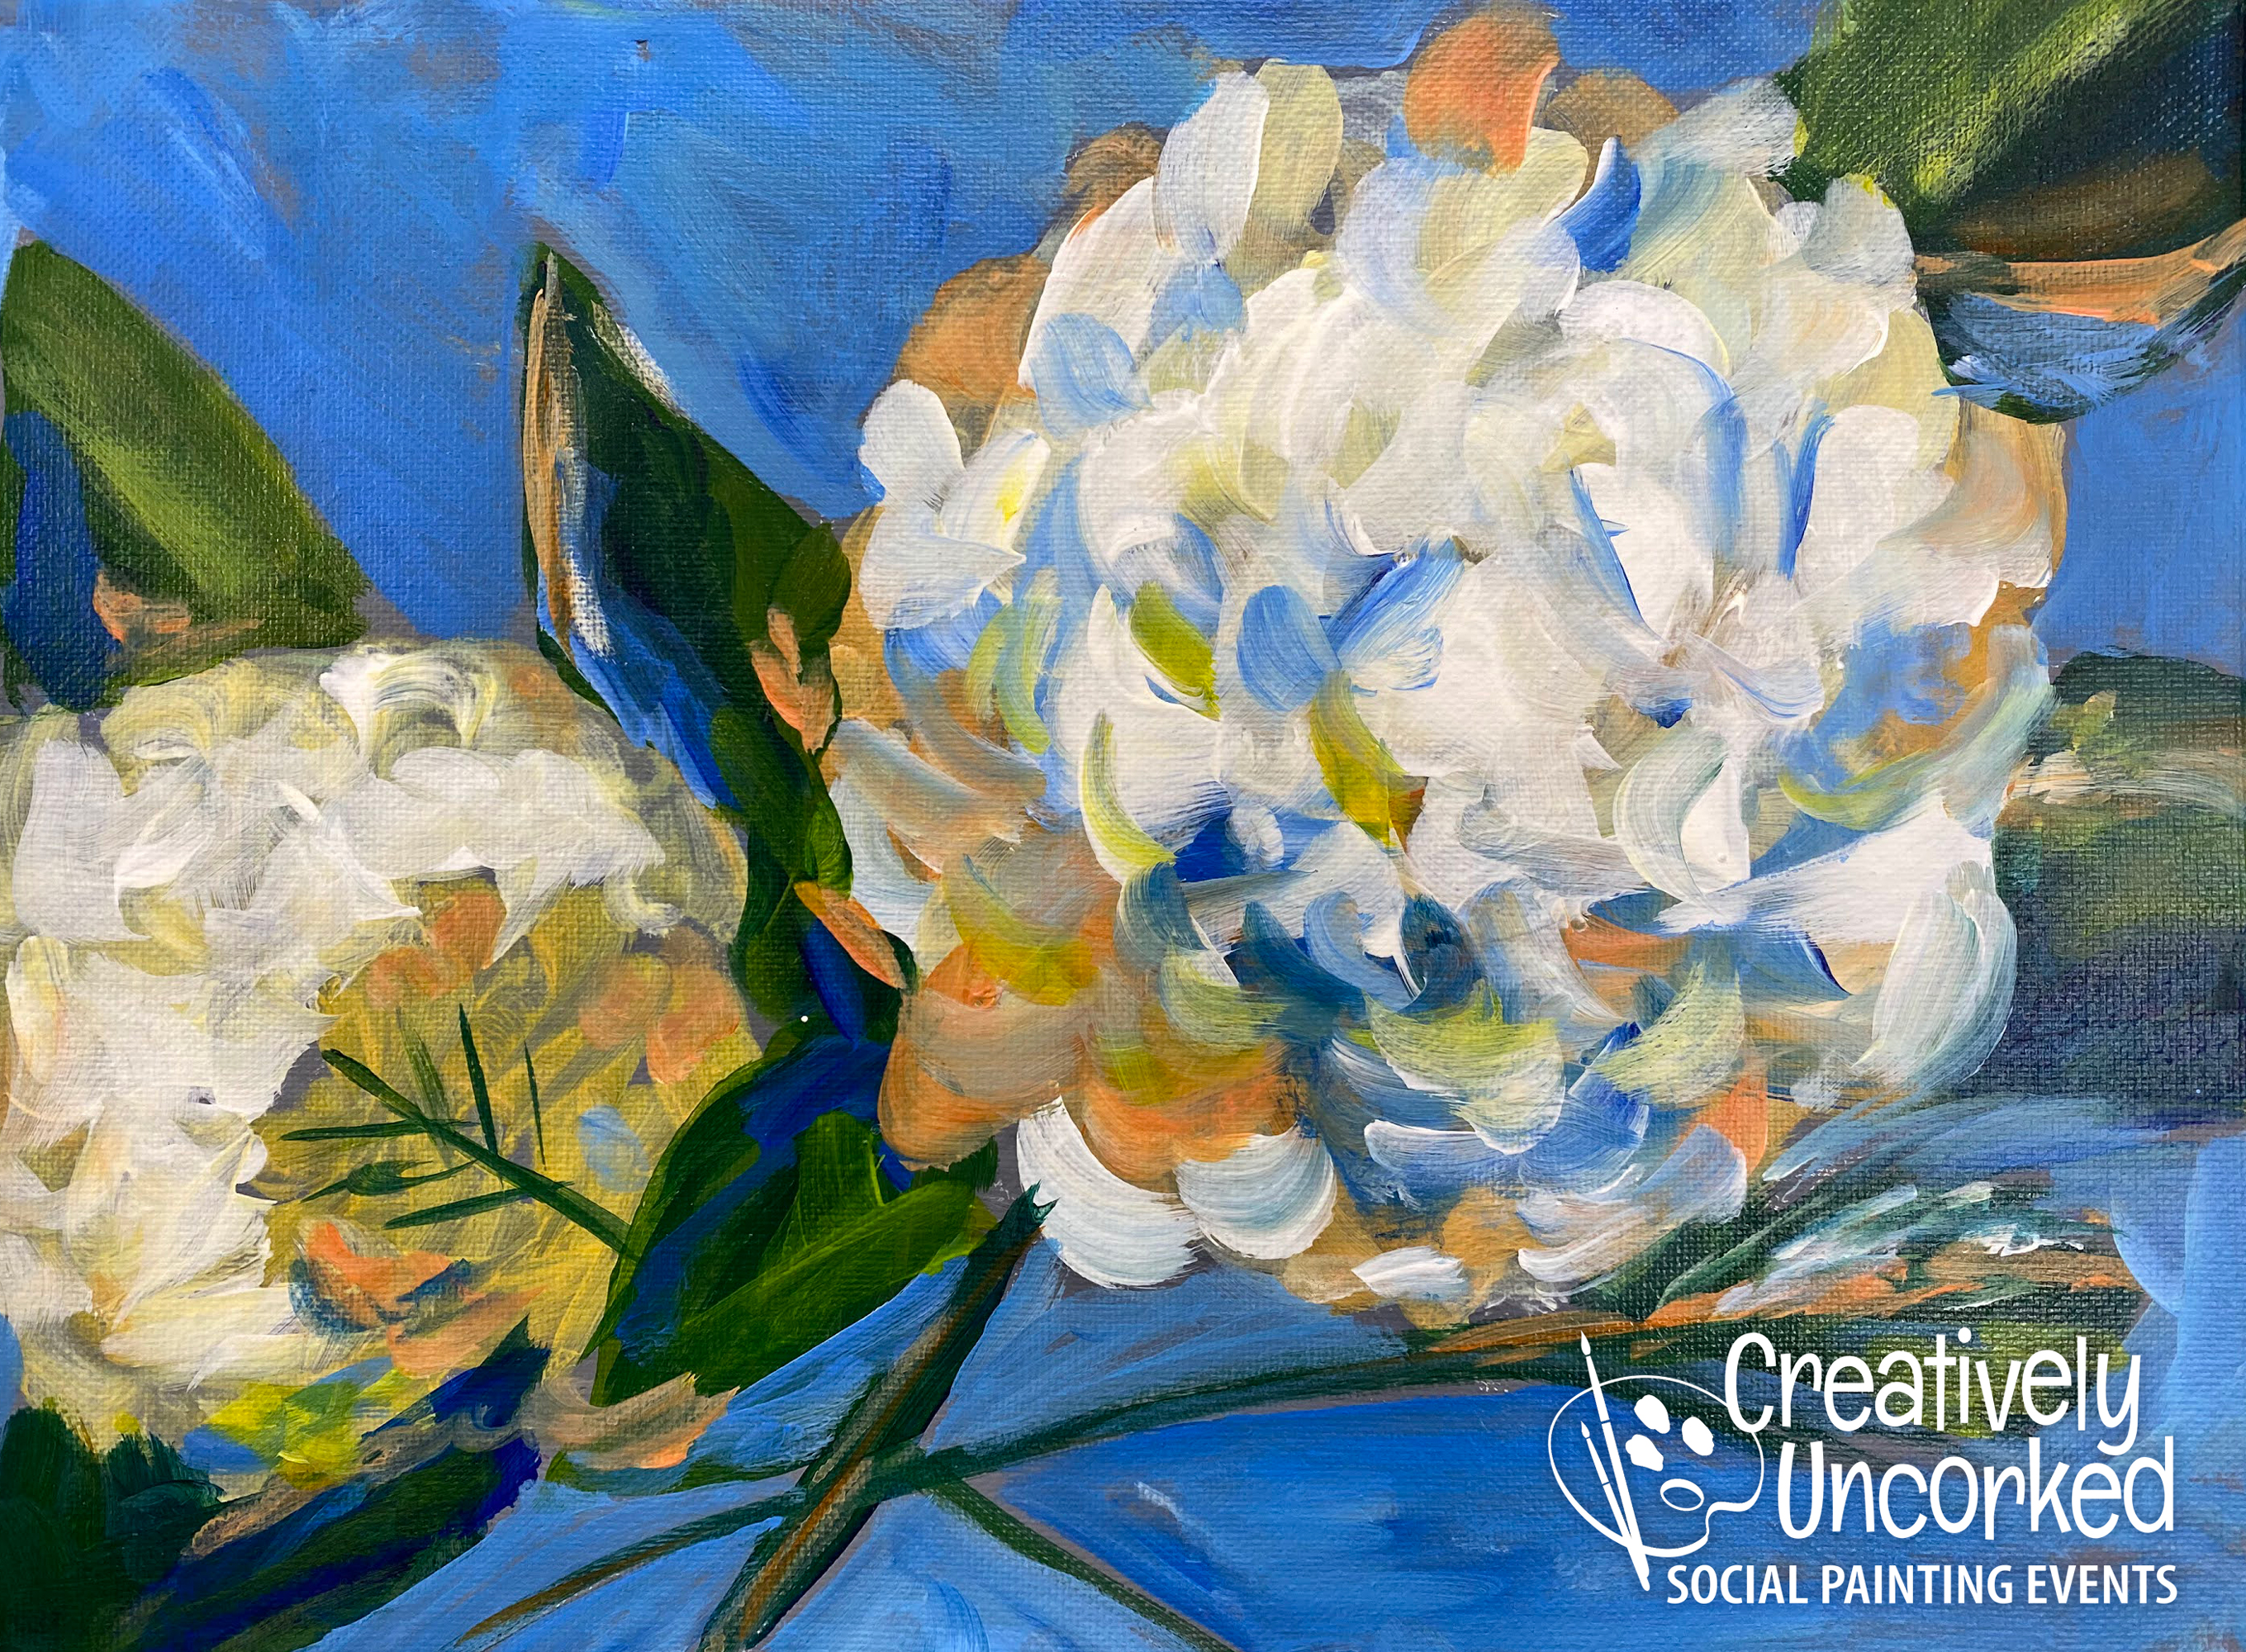 White Hydrangea from Creatively Uncorked http://creativelyuncorked.com/